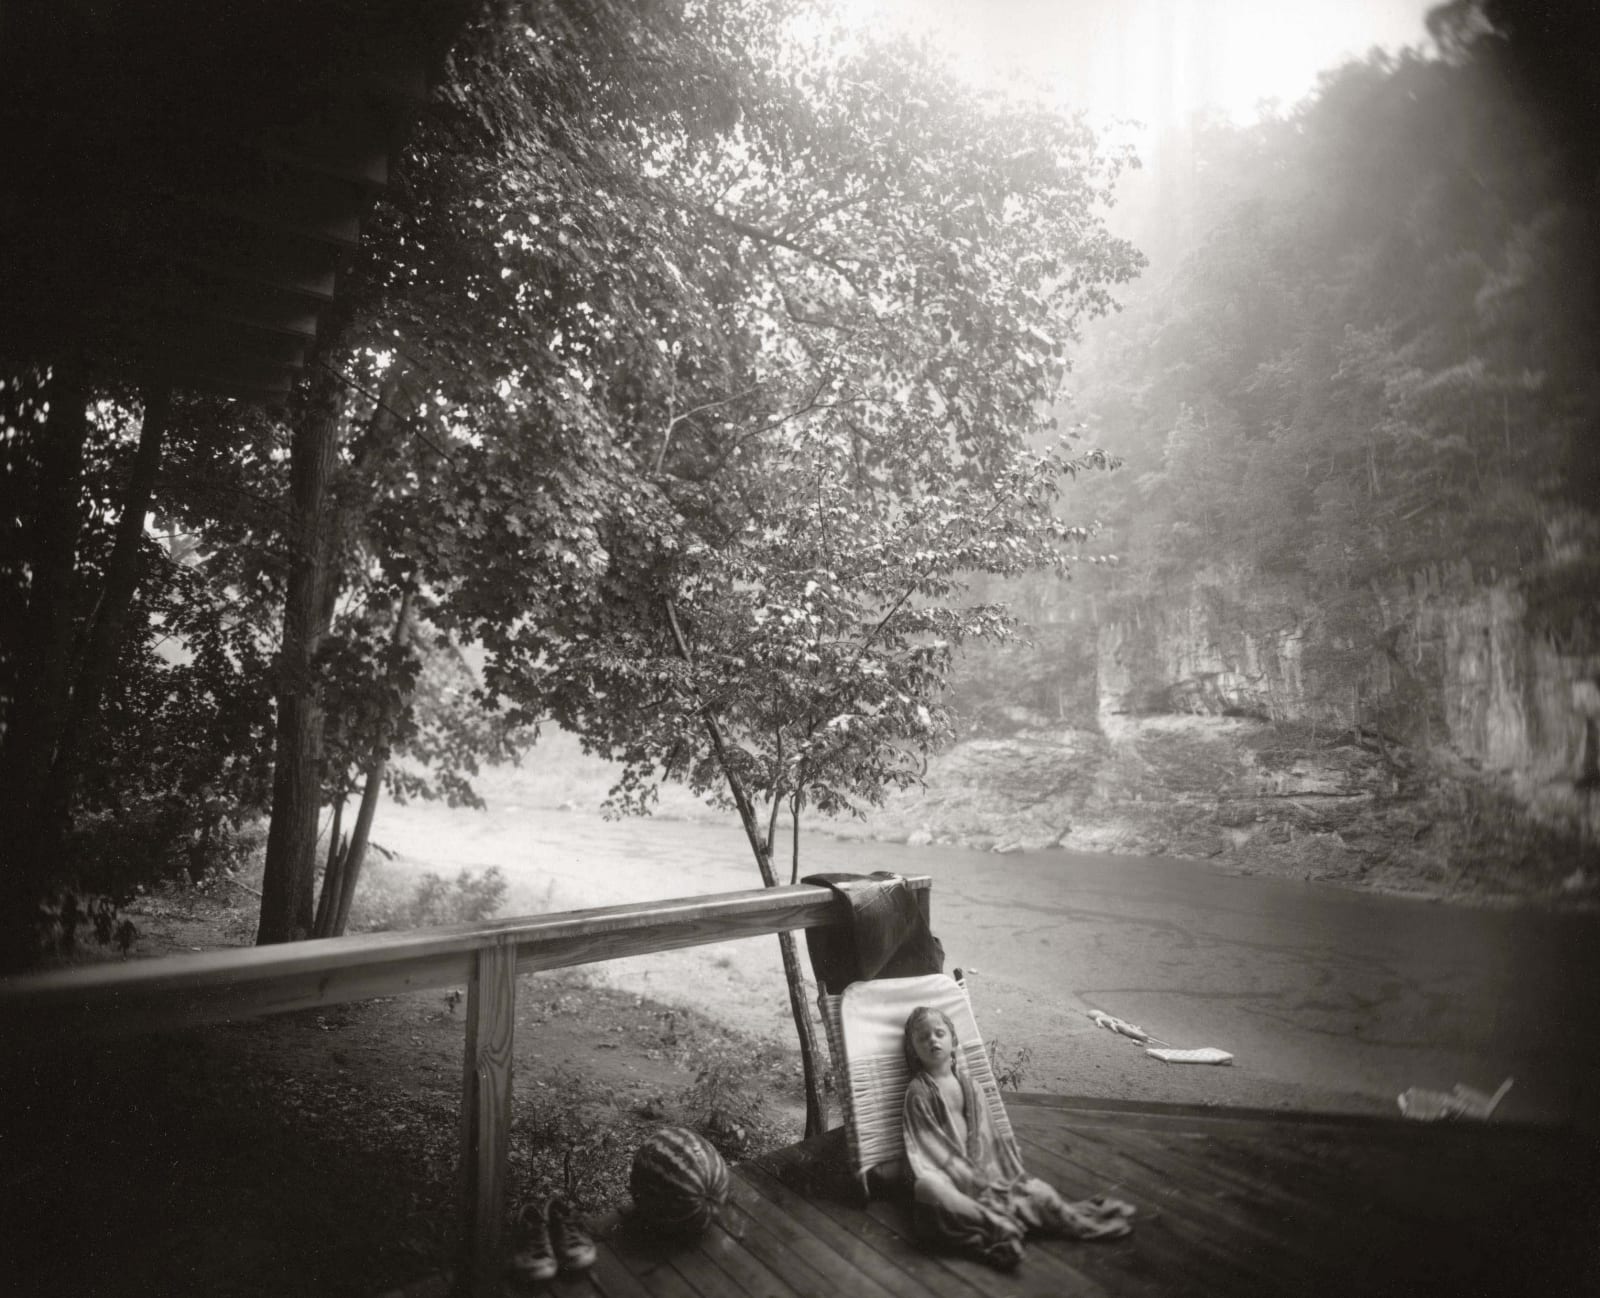 Virginia sleeping on patio with alligator swim toy on river's edge in background, from the Immediate Family series by Sally Mann